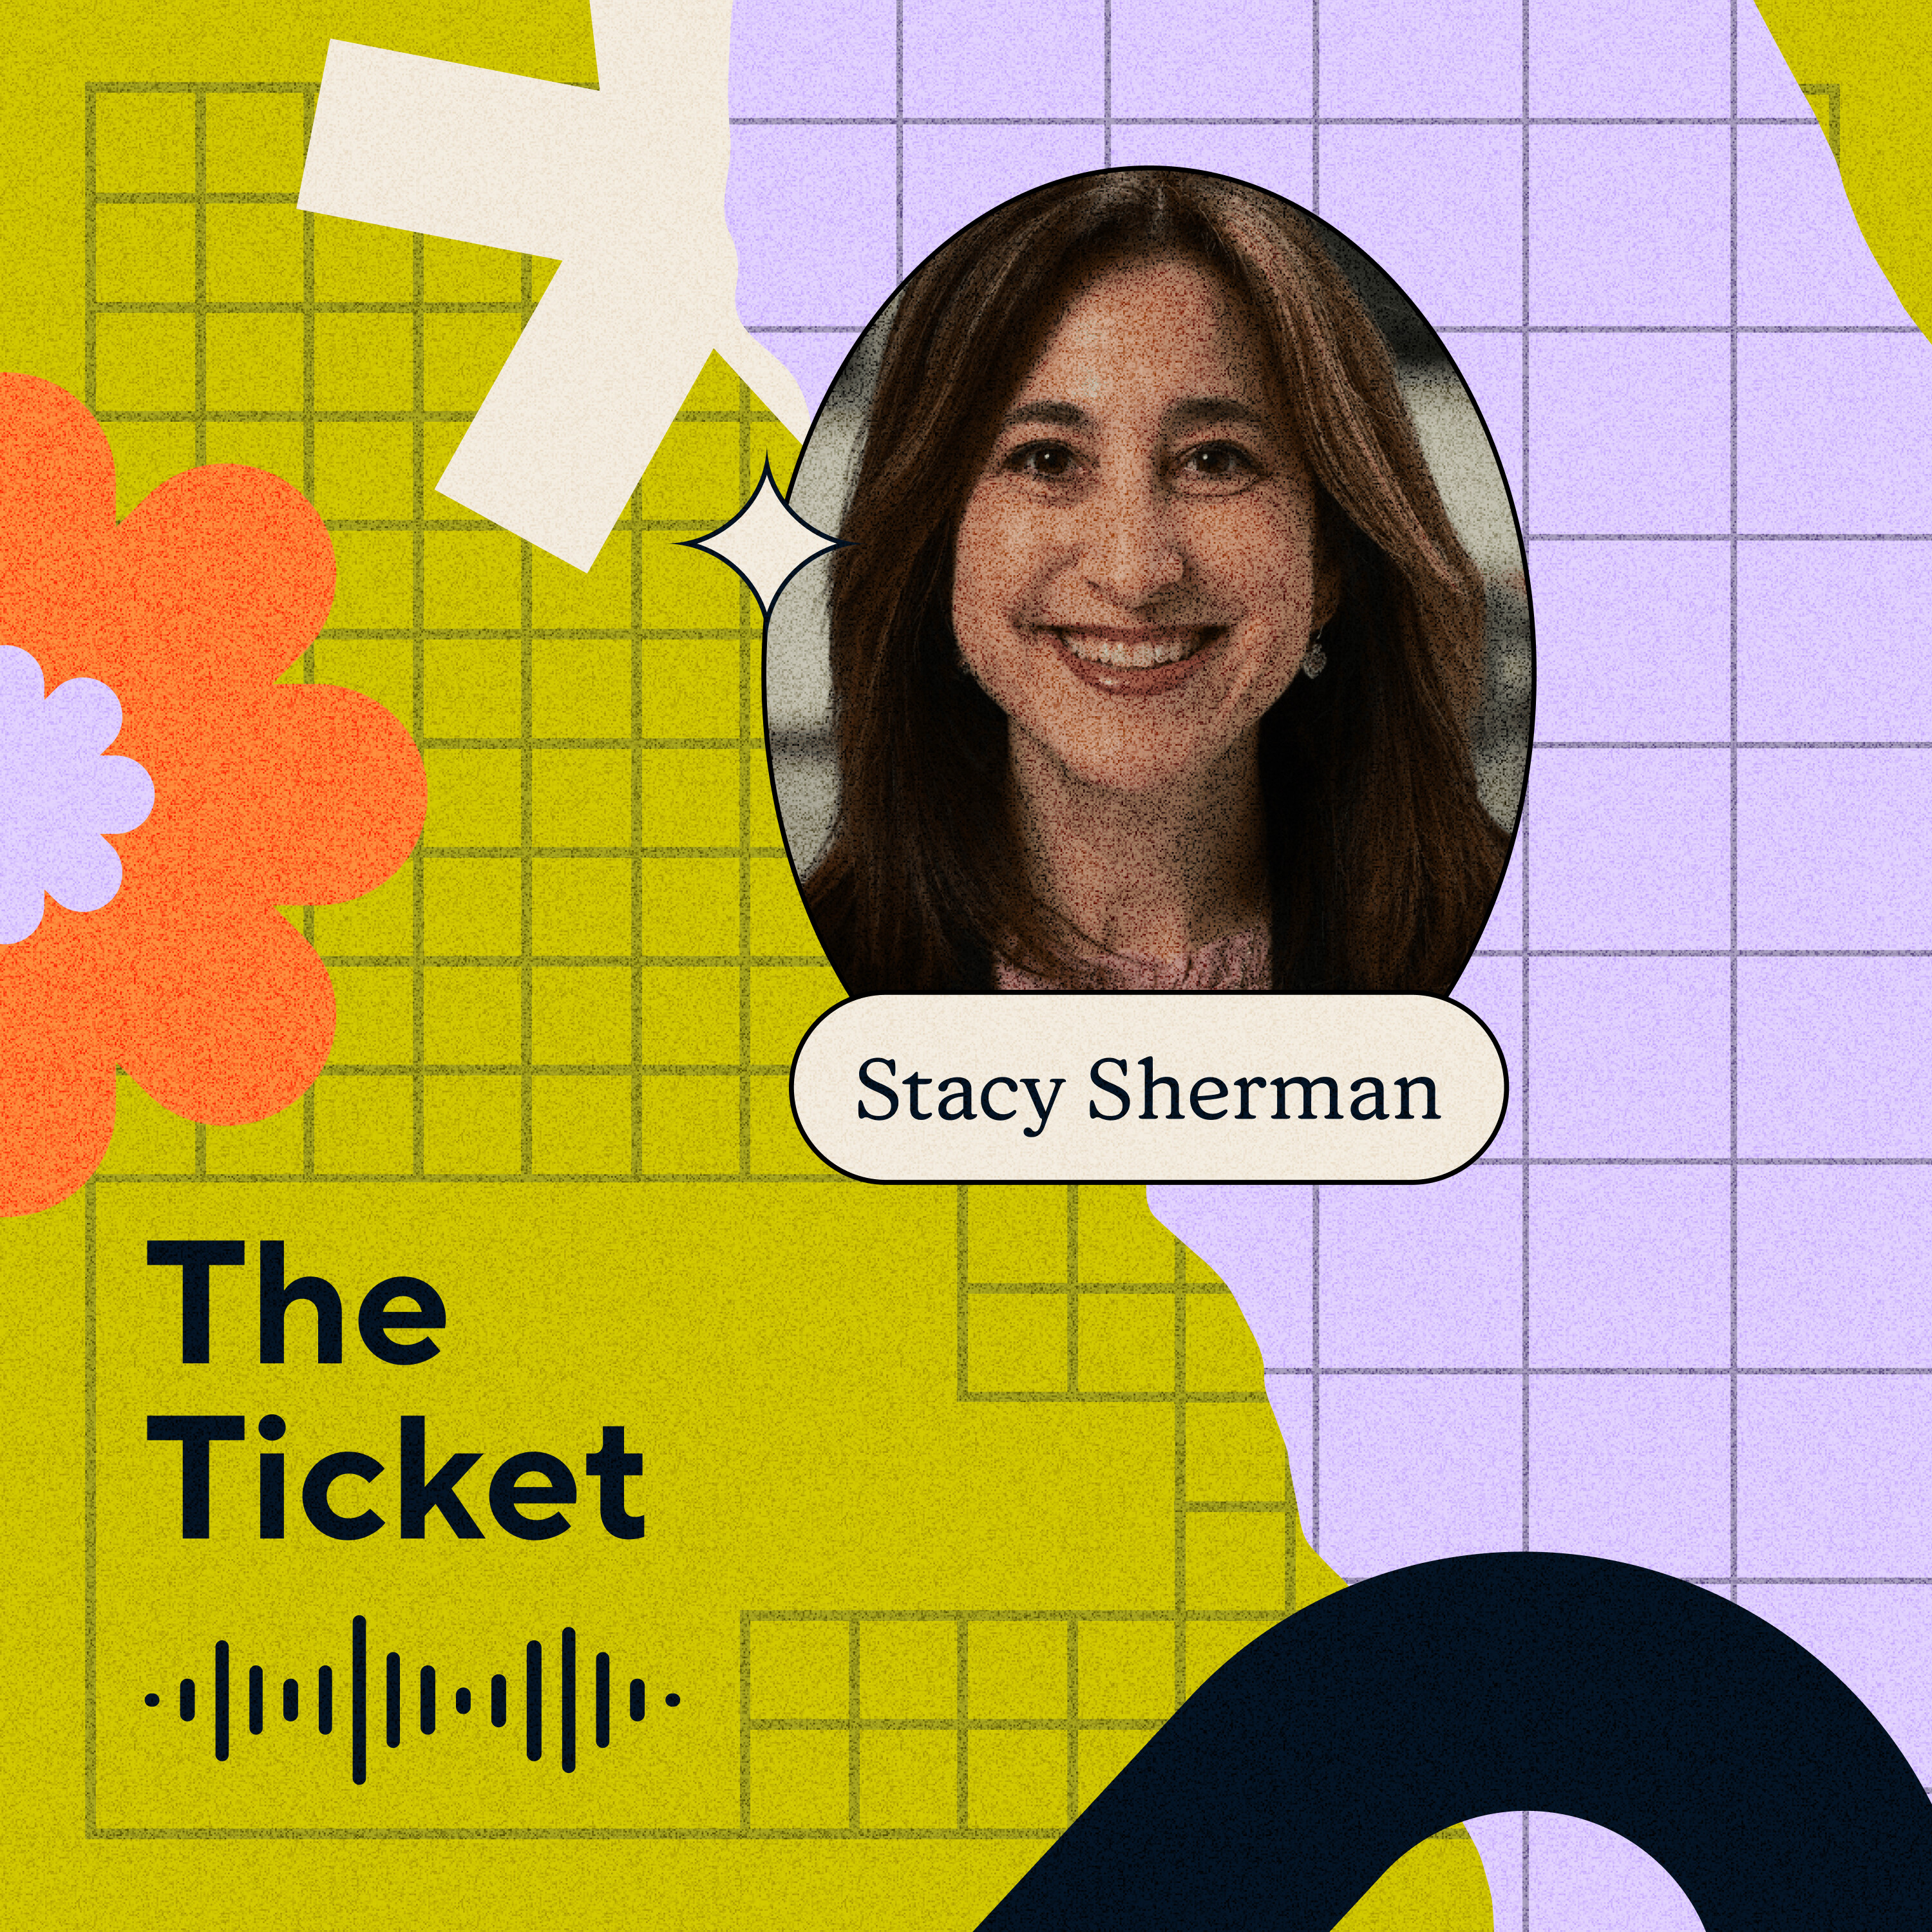 Stacy Sherman on how to design customer experiences that drive loyalty